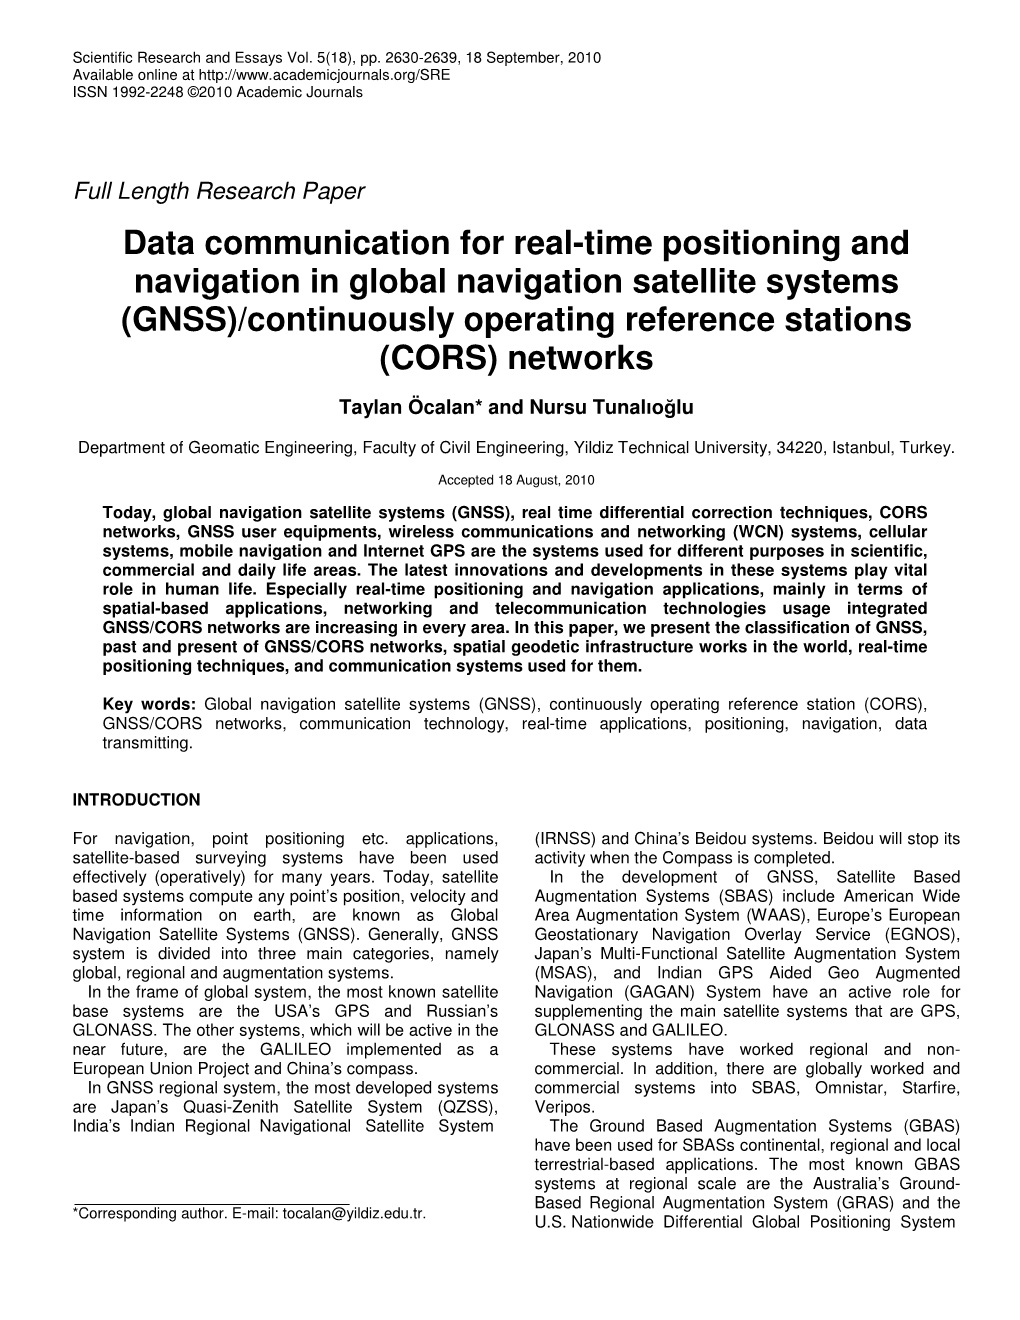 GNSS)/Continuously Operating Reference Stations (CORS) Networks